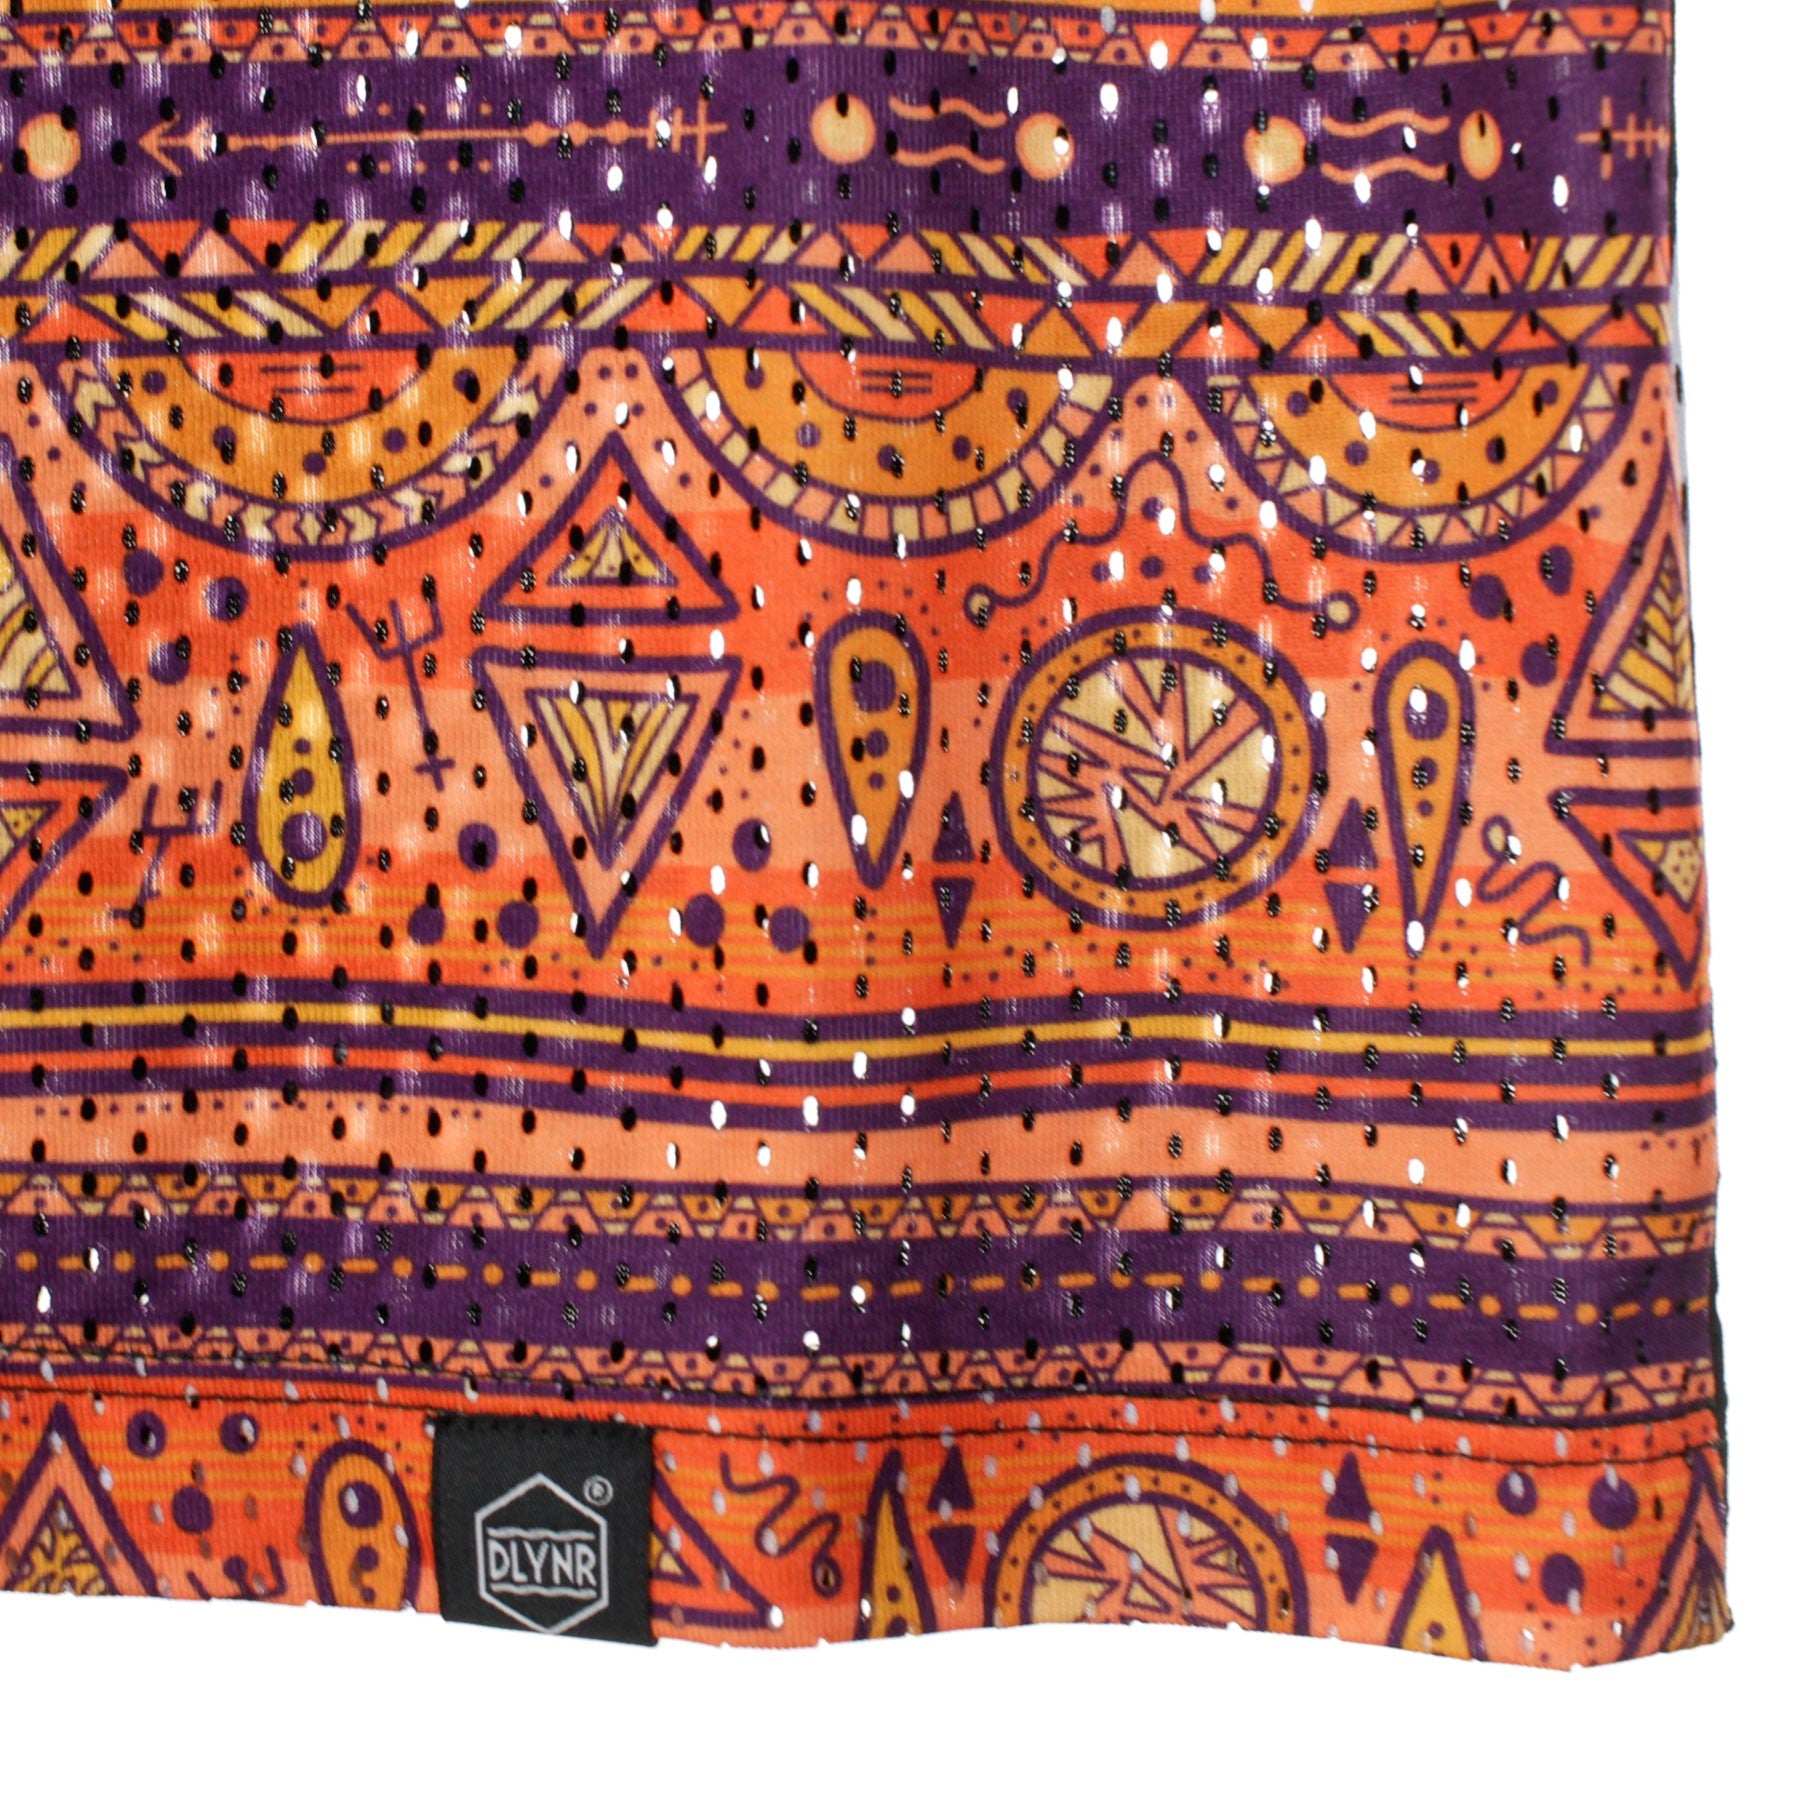 Dolly Noire, Canotta Tipo Basket Uomo Hal Africa Tank Top, 